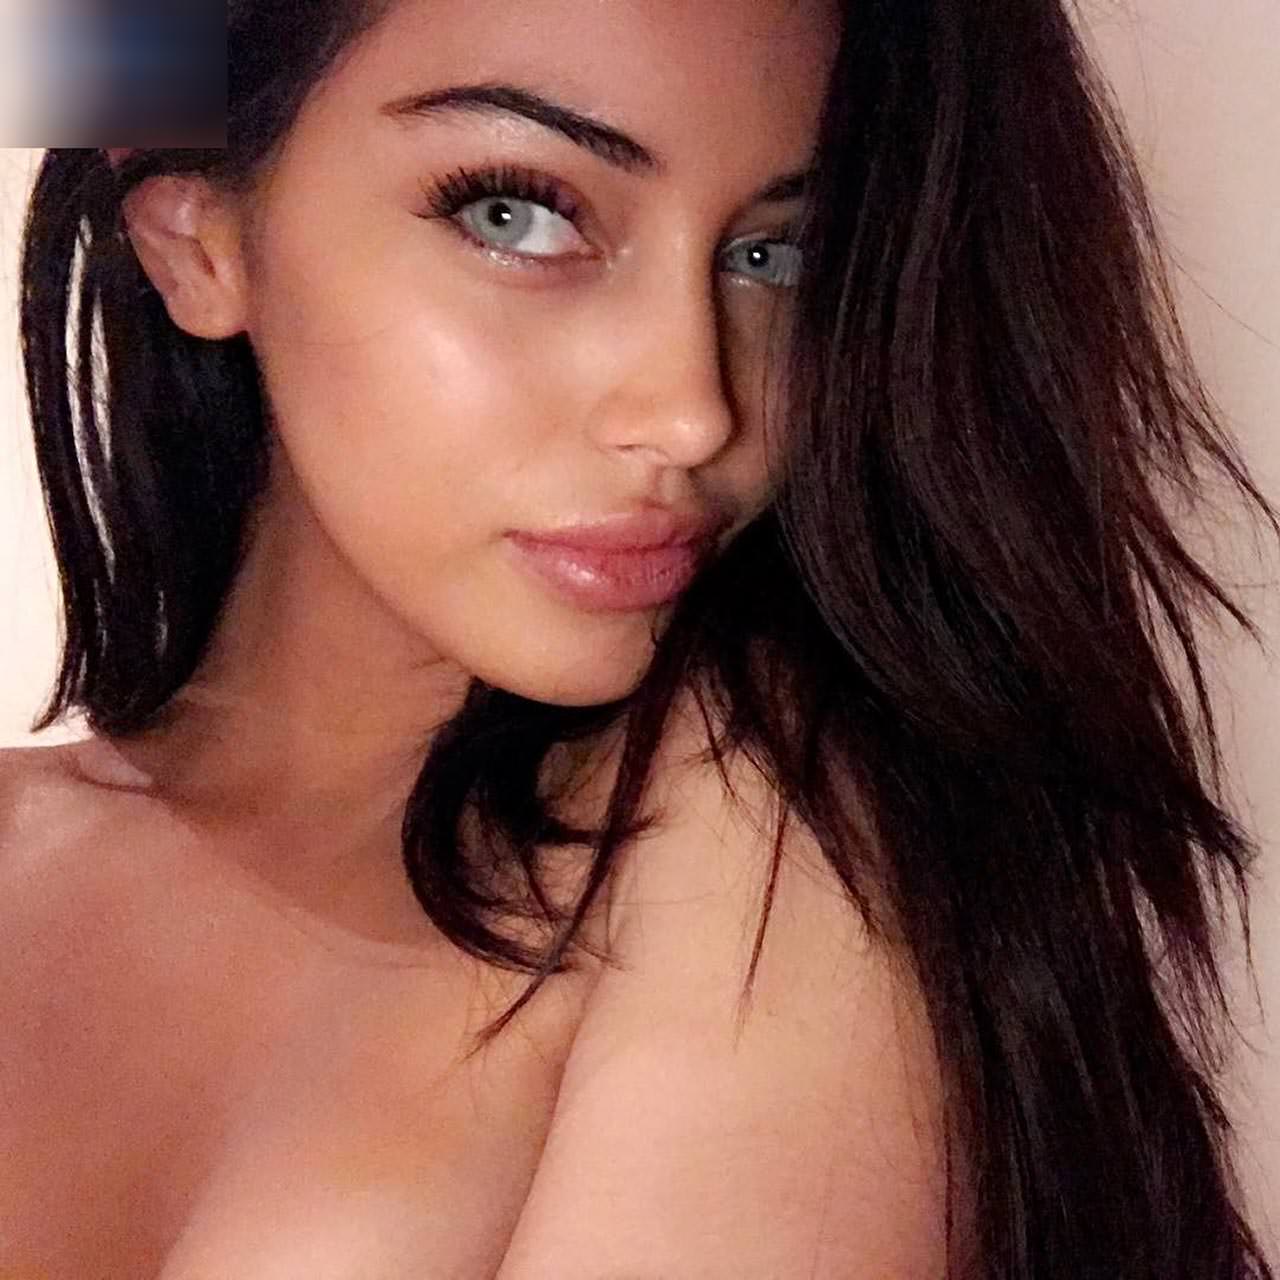 Wolfie cindy nudes - 🧡 Cindy Kimberly Nude & Sexy Photos And LEAKED Po...